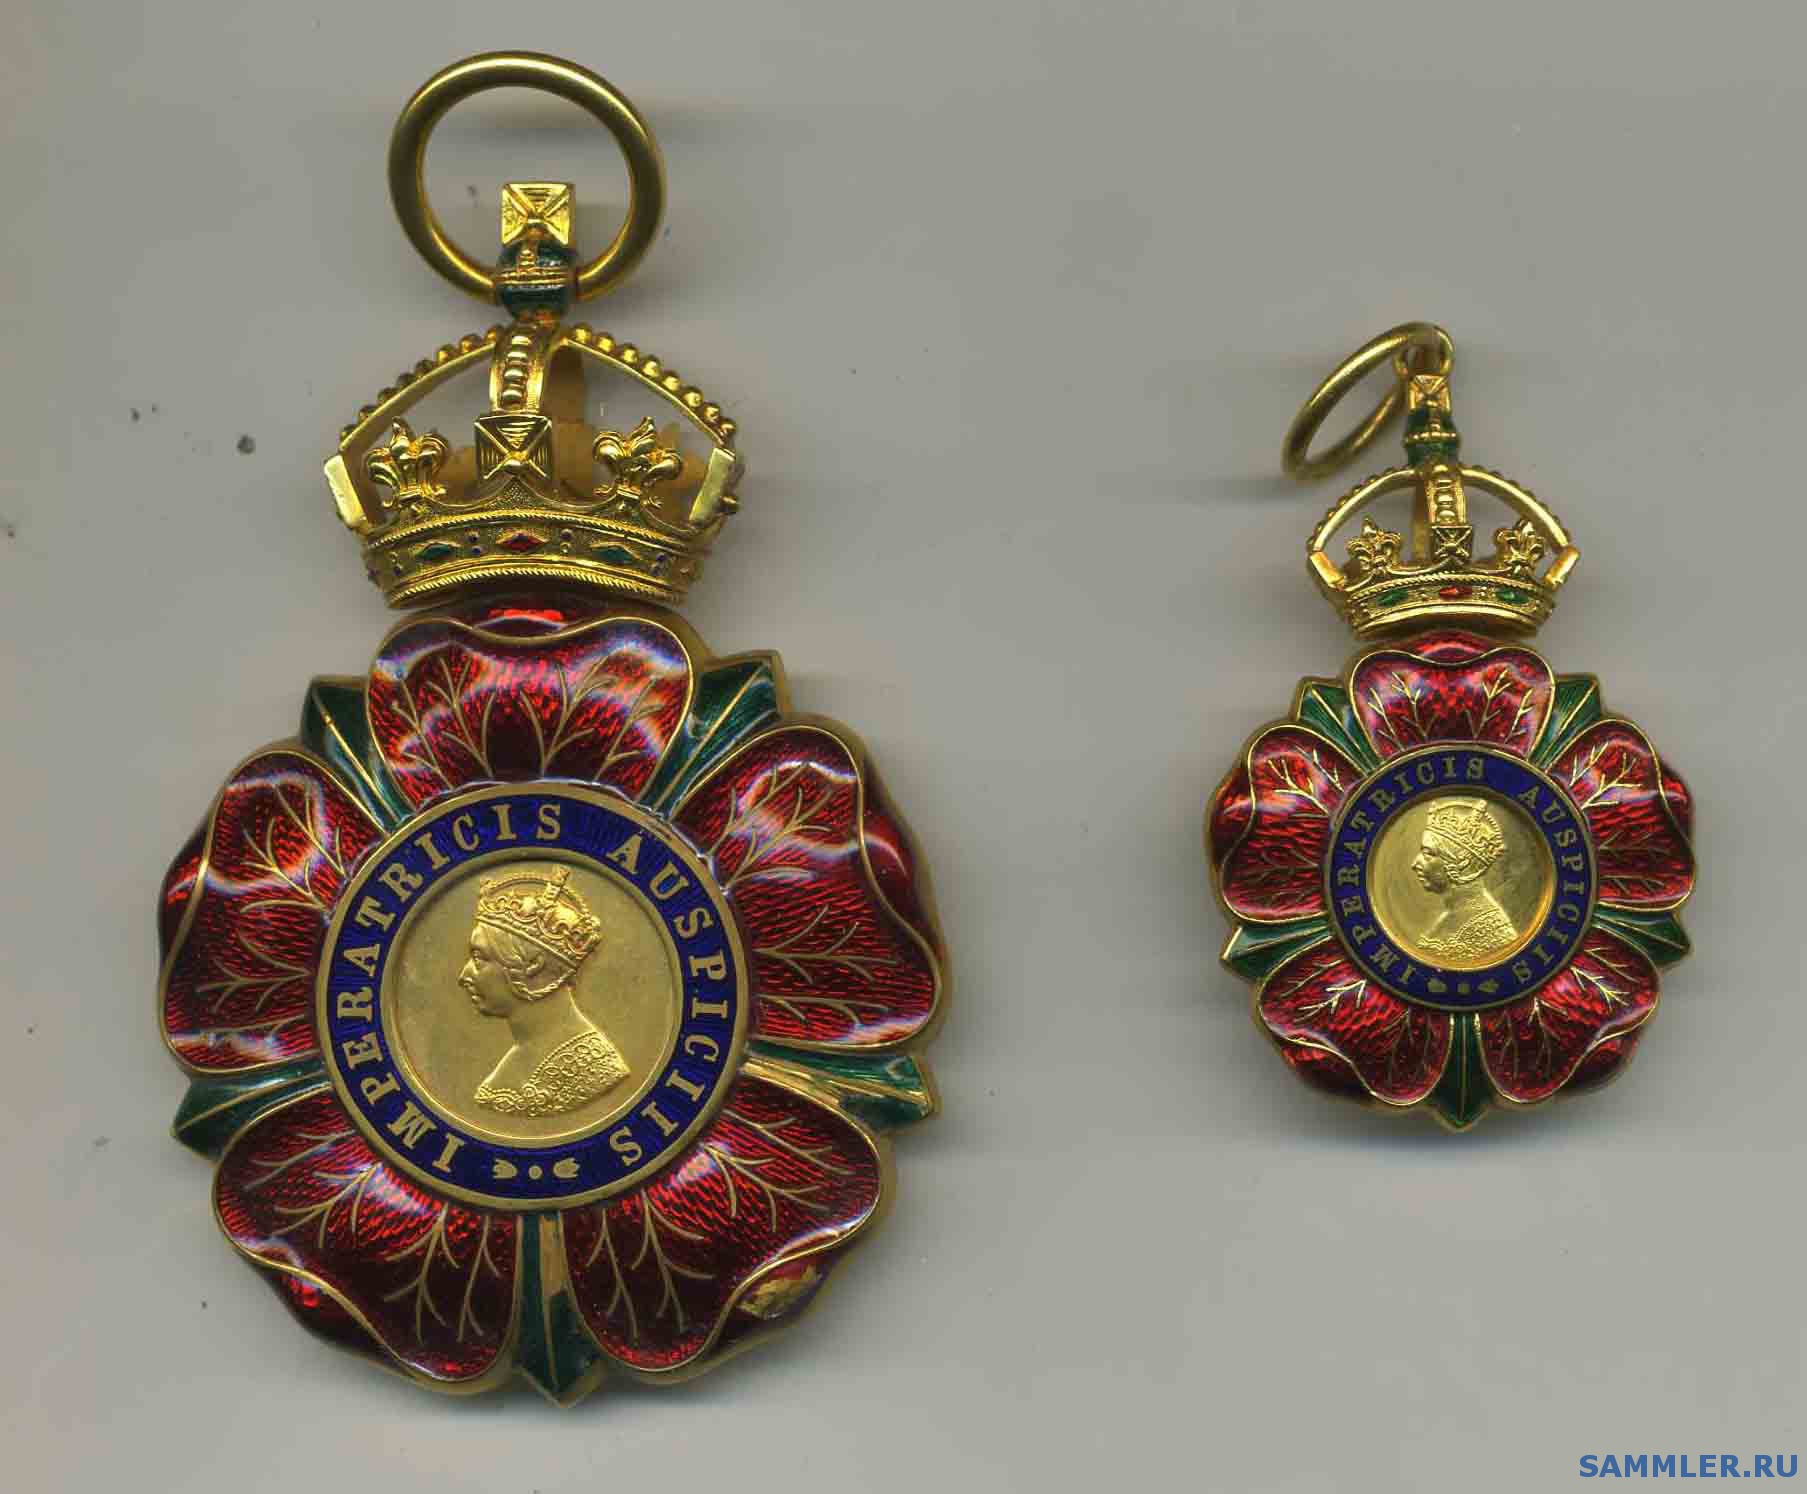 Knight_Grand_Commander__s_and_Companion__s_badges__Order_of_the_Indian_Empire.jpg